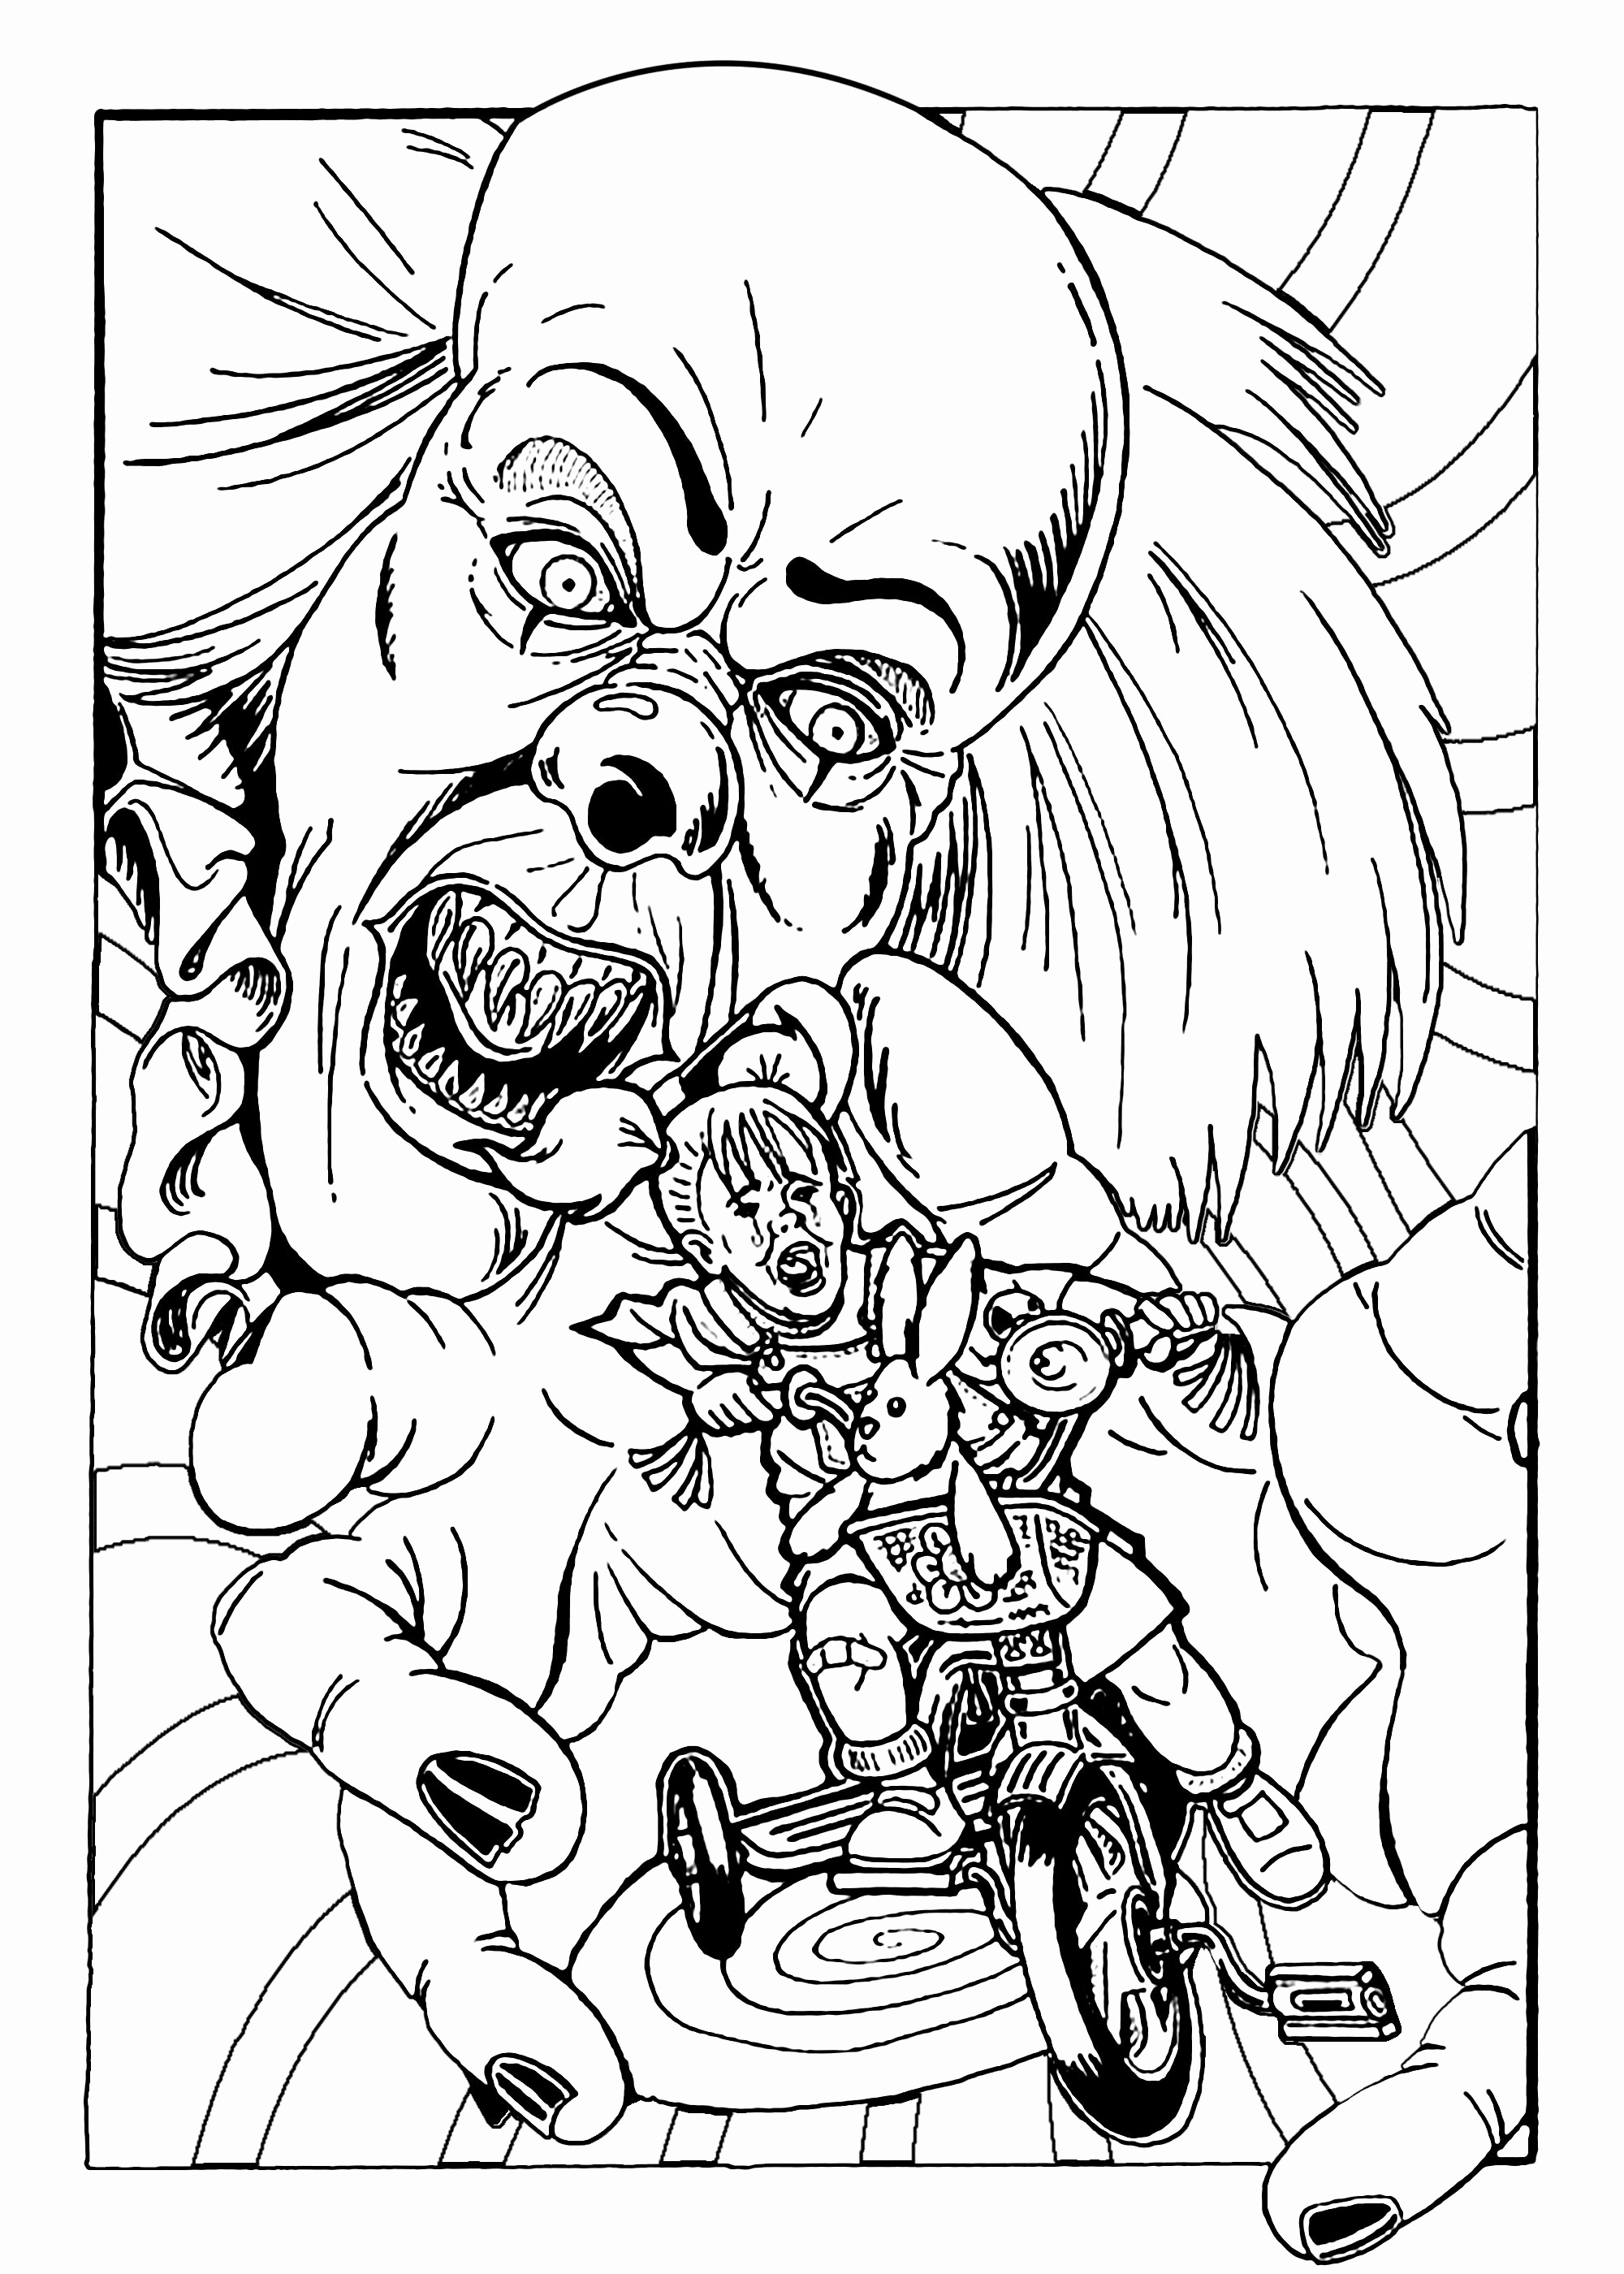 Printable Horror Movie Coloring Pages - Get Your Hands on Amazing Free ...